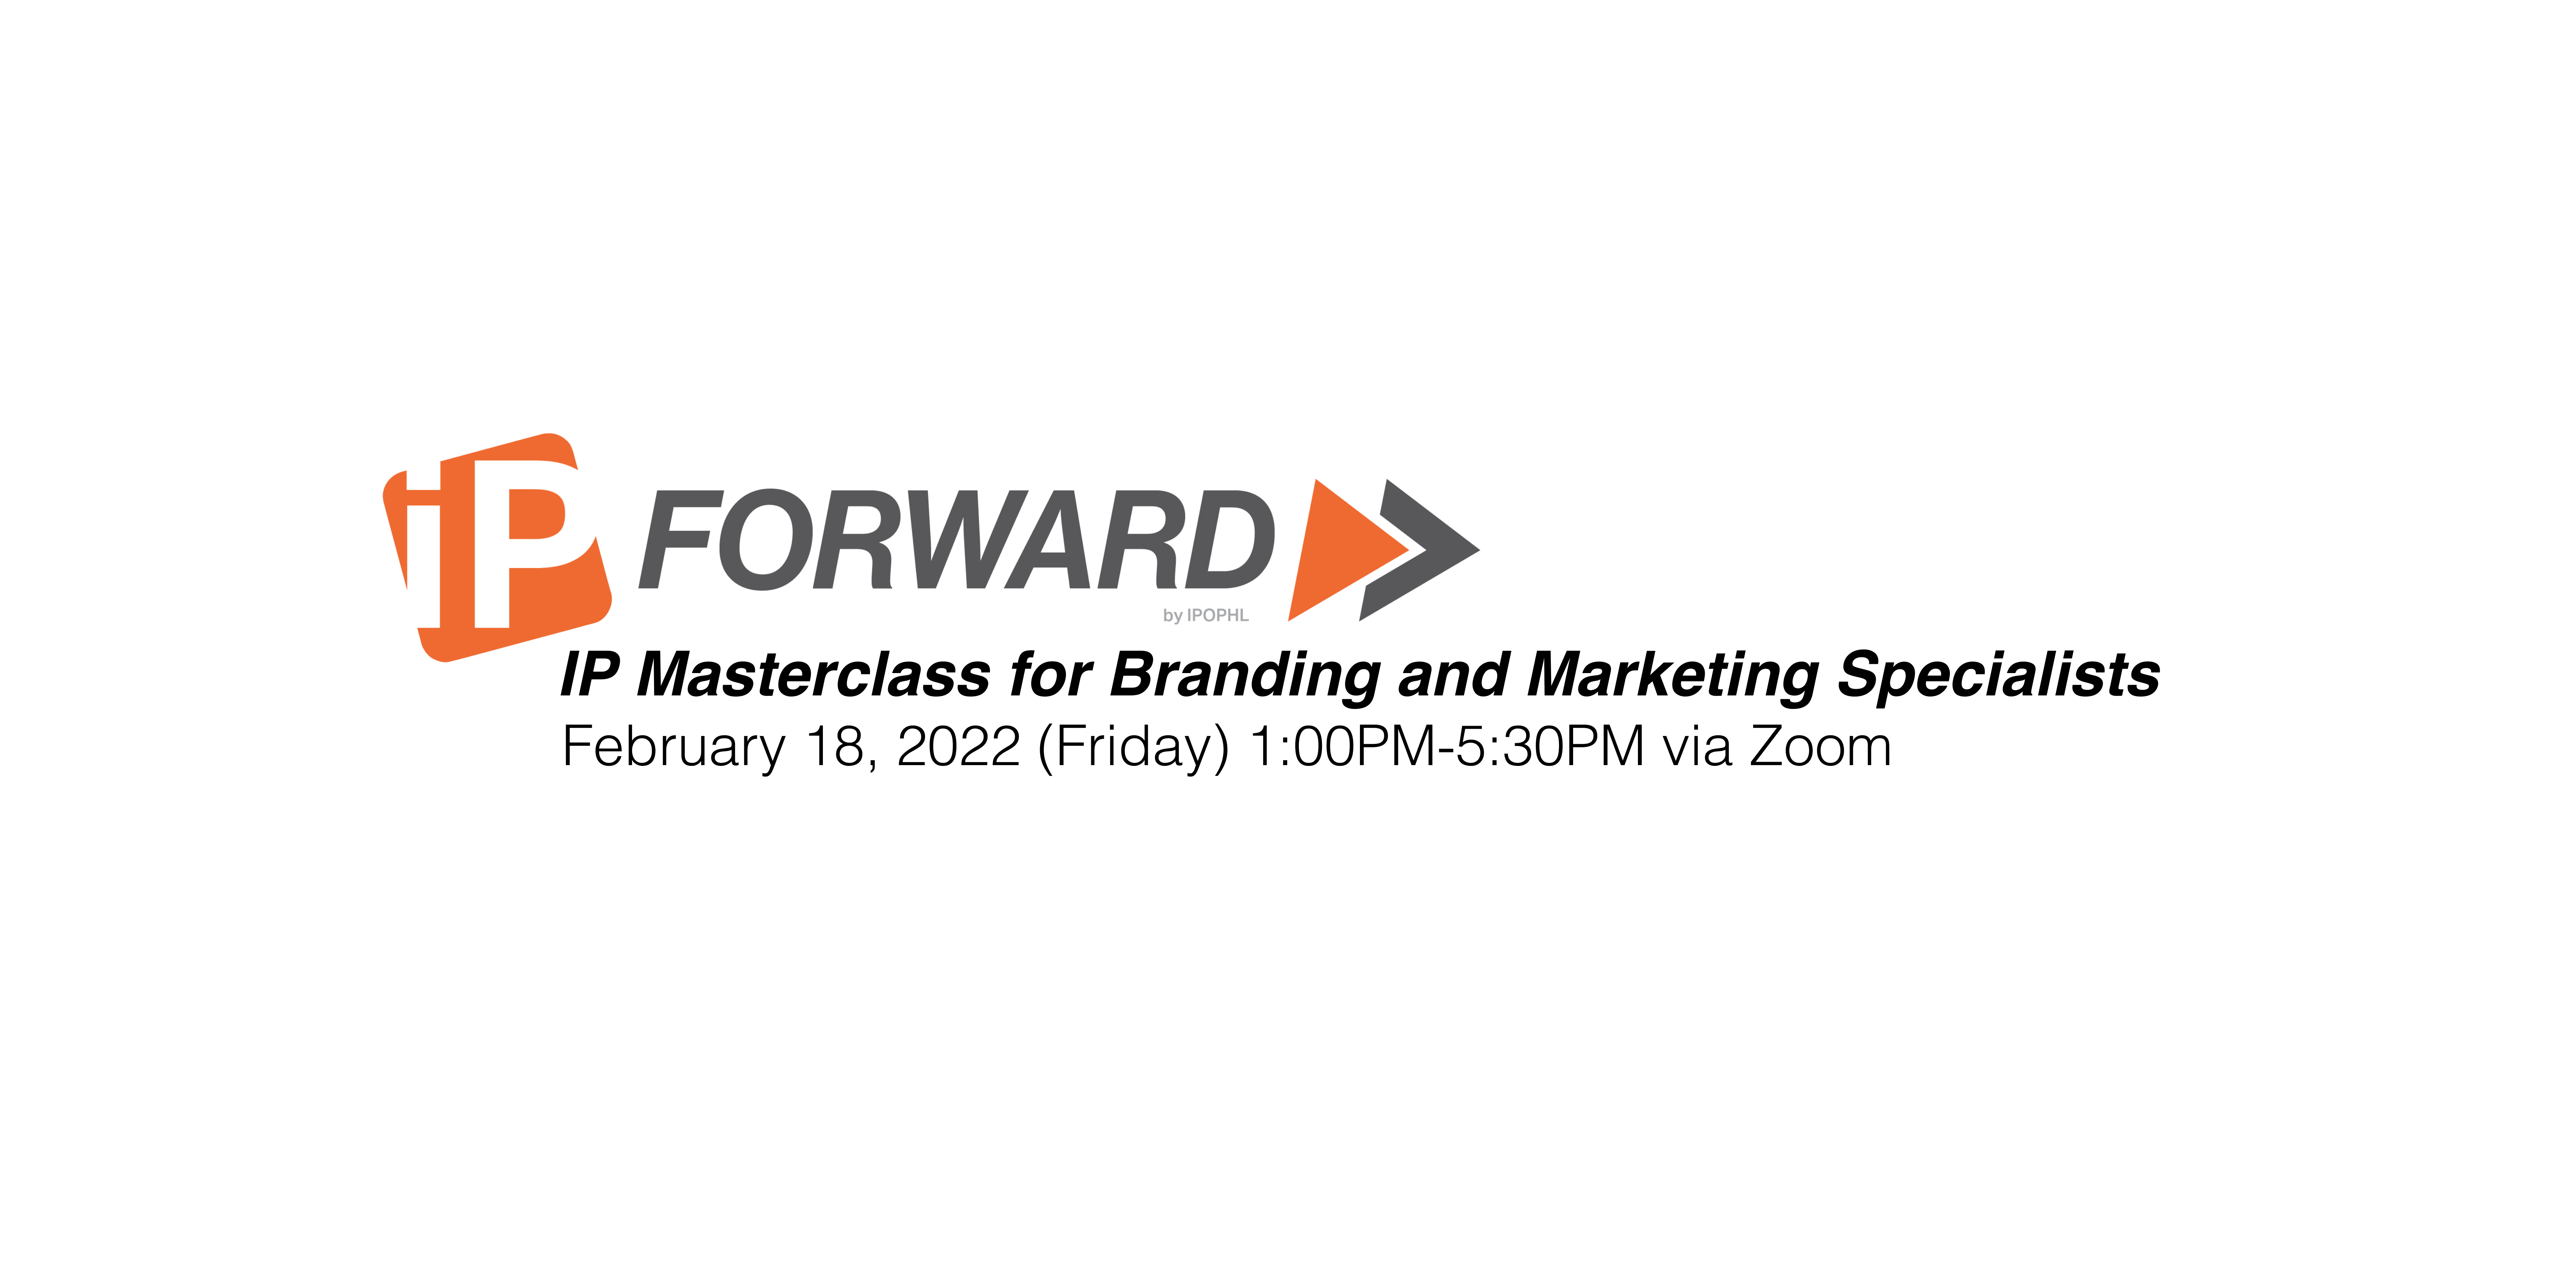 IP Forward>>IP Masterclass for Branding and Marketing Specialists